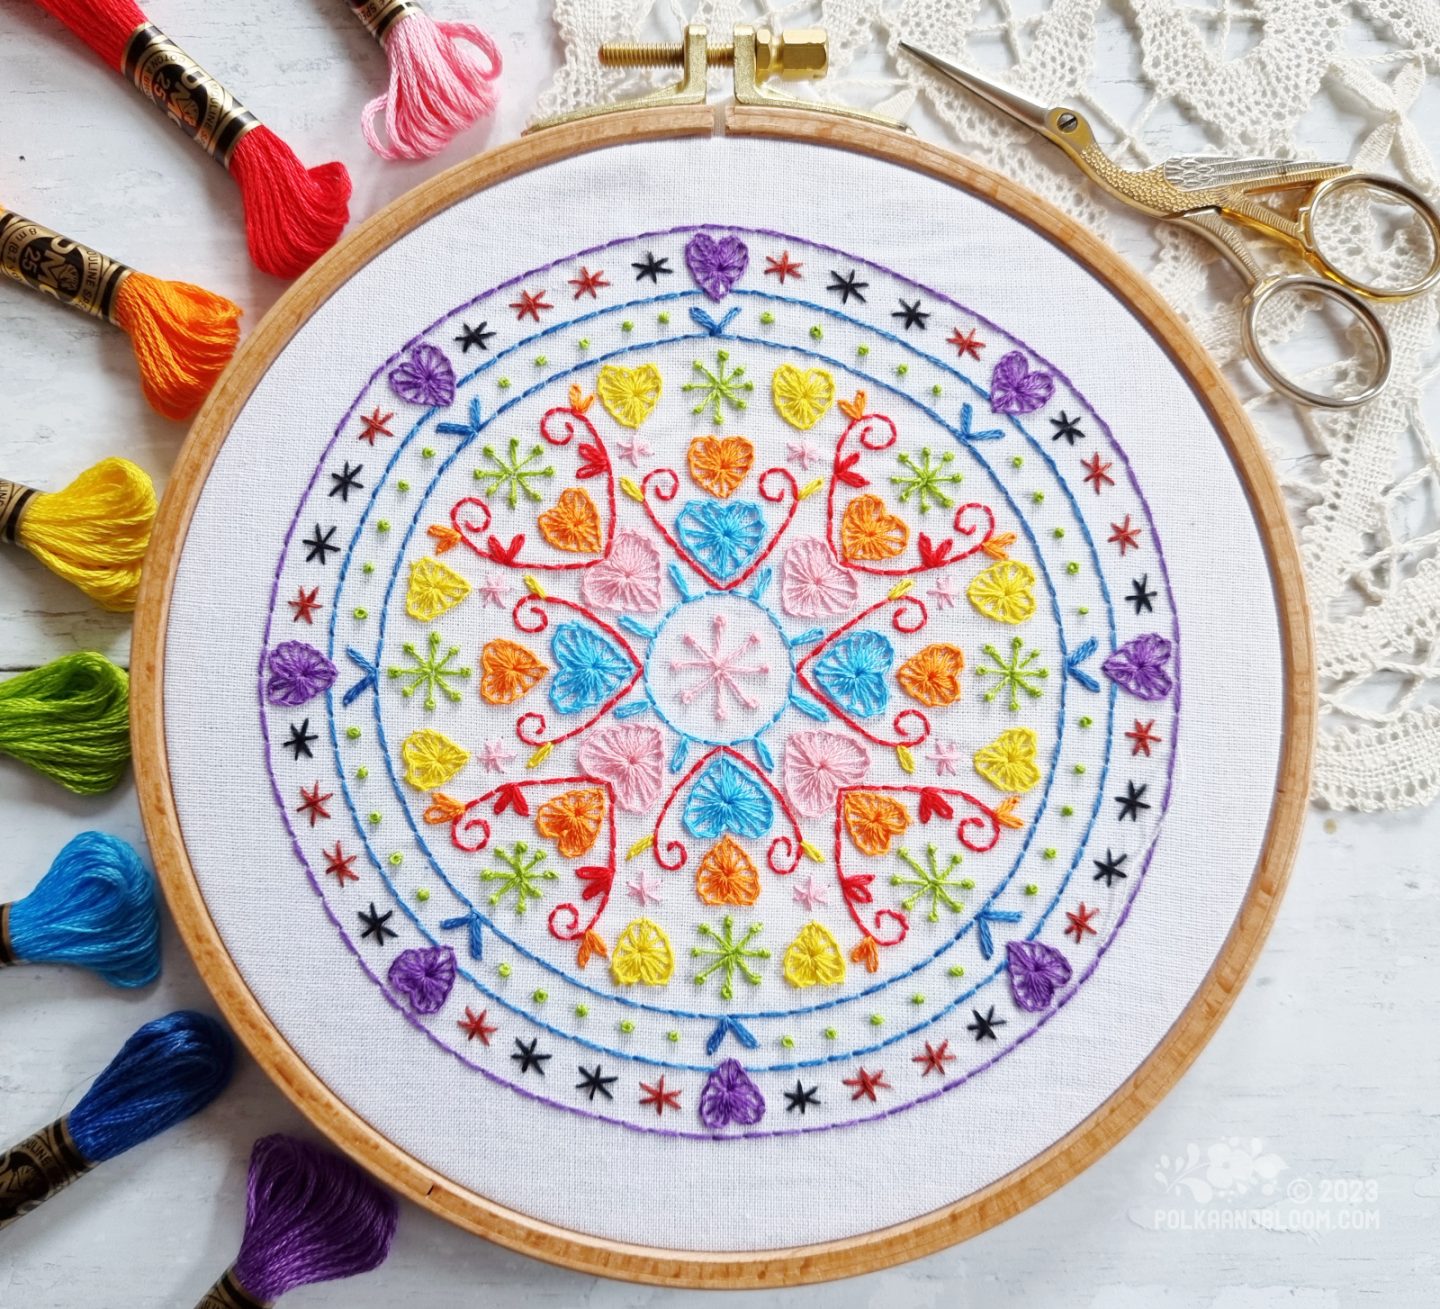 Overhead view of an embroidery hoop with white fabric. On the fabric is embroidered a mandala inspired design with colours inspired by the Progress Pride flag.